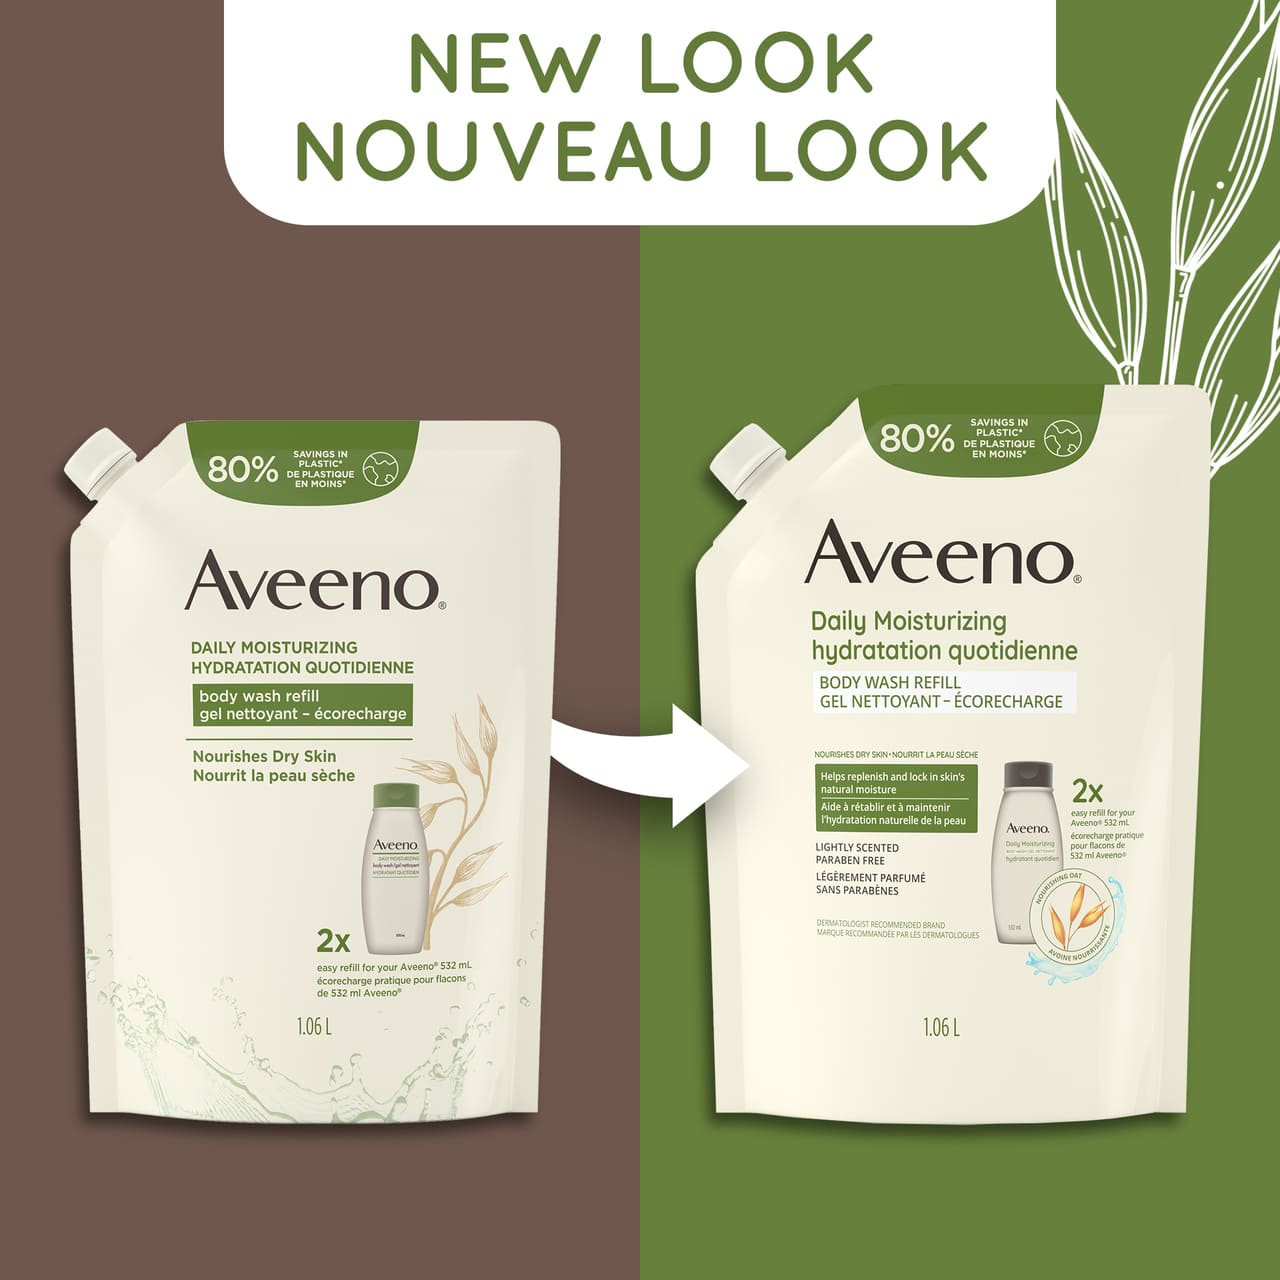 Old and new packaging of AVEENO® Daily Moisturizing Body Wash Refill Pouch, 1.06L, with text 'new look'